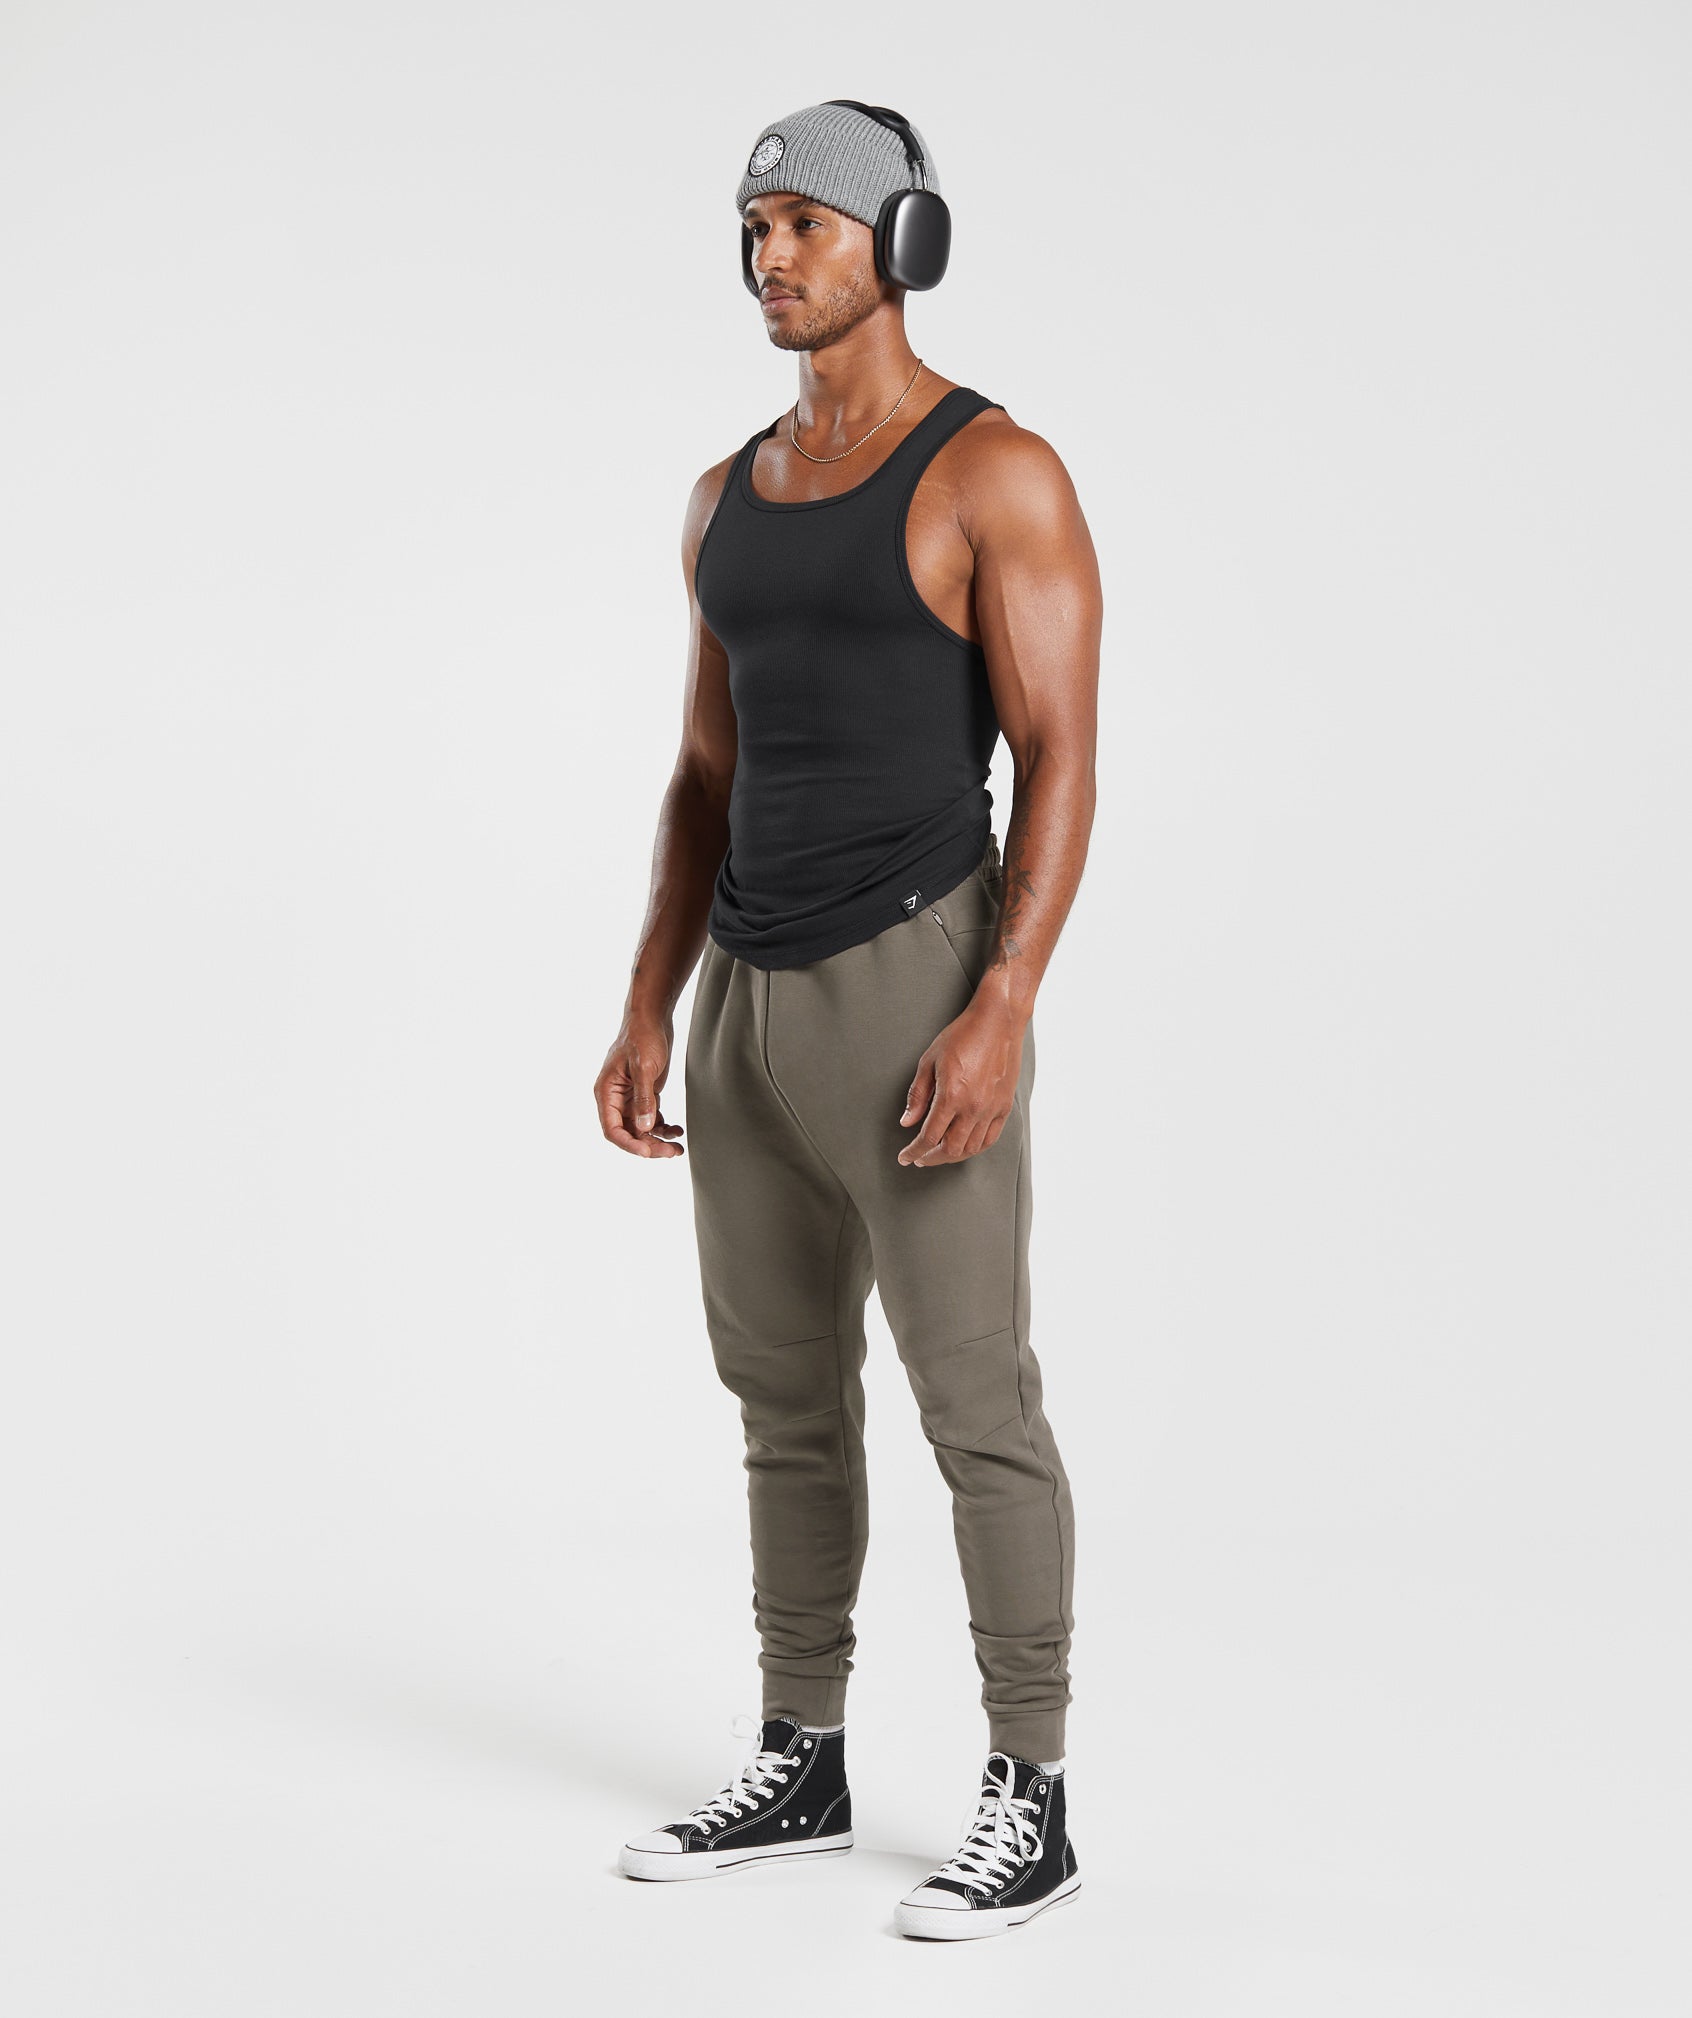 Rest Day Knit Joggers in Camo Brown - view 4